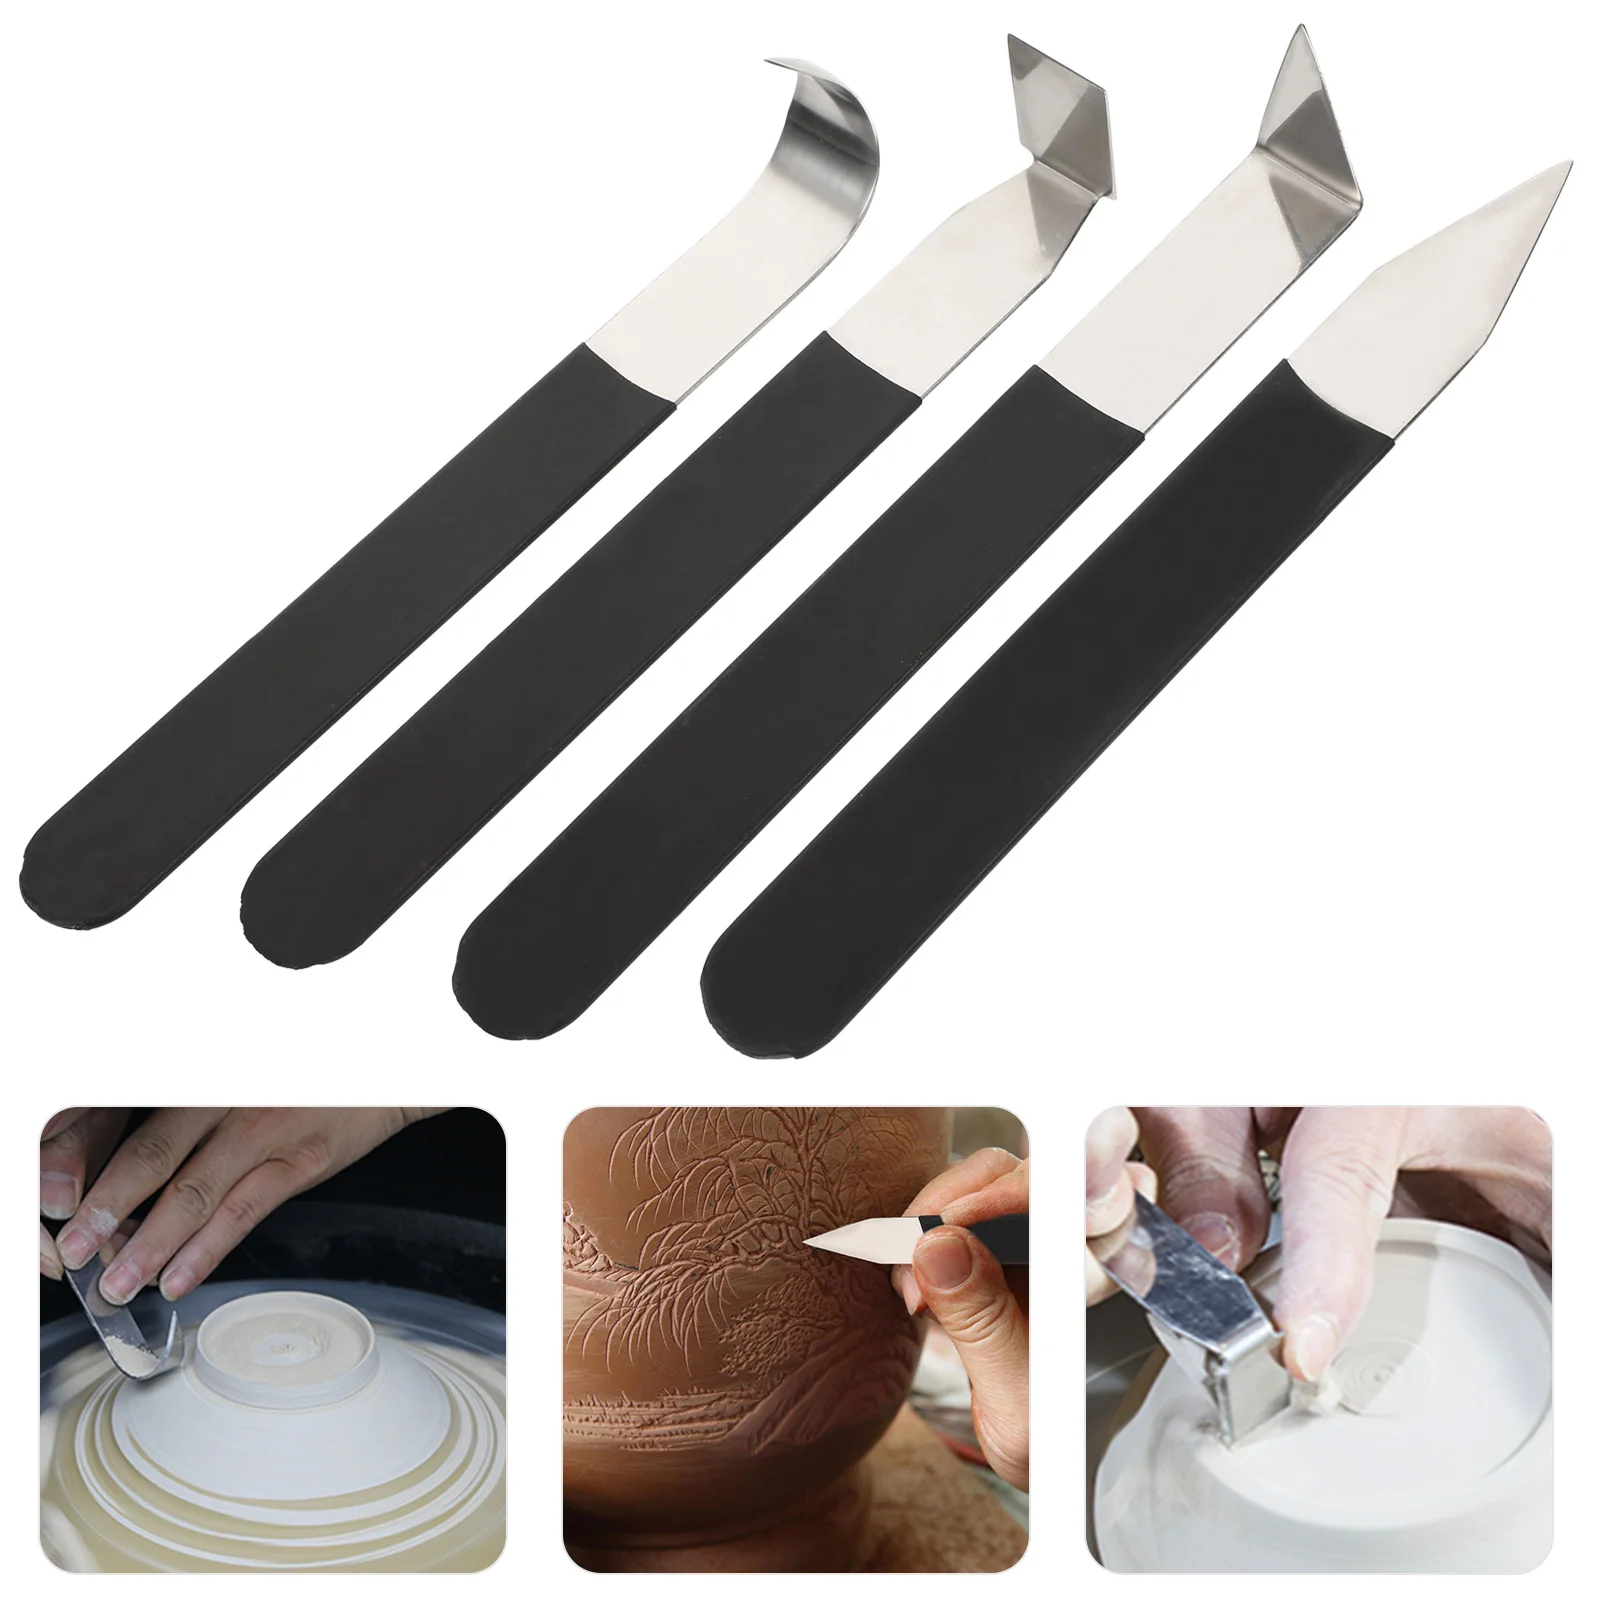 

Carving Pottery Clay Tools Tool Sculpture Hand Ceramic Craft Shaping Sculpting Trimming Metal Engraving Modeling Fettling Diy